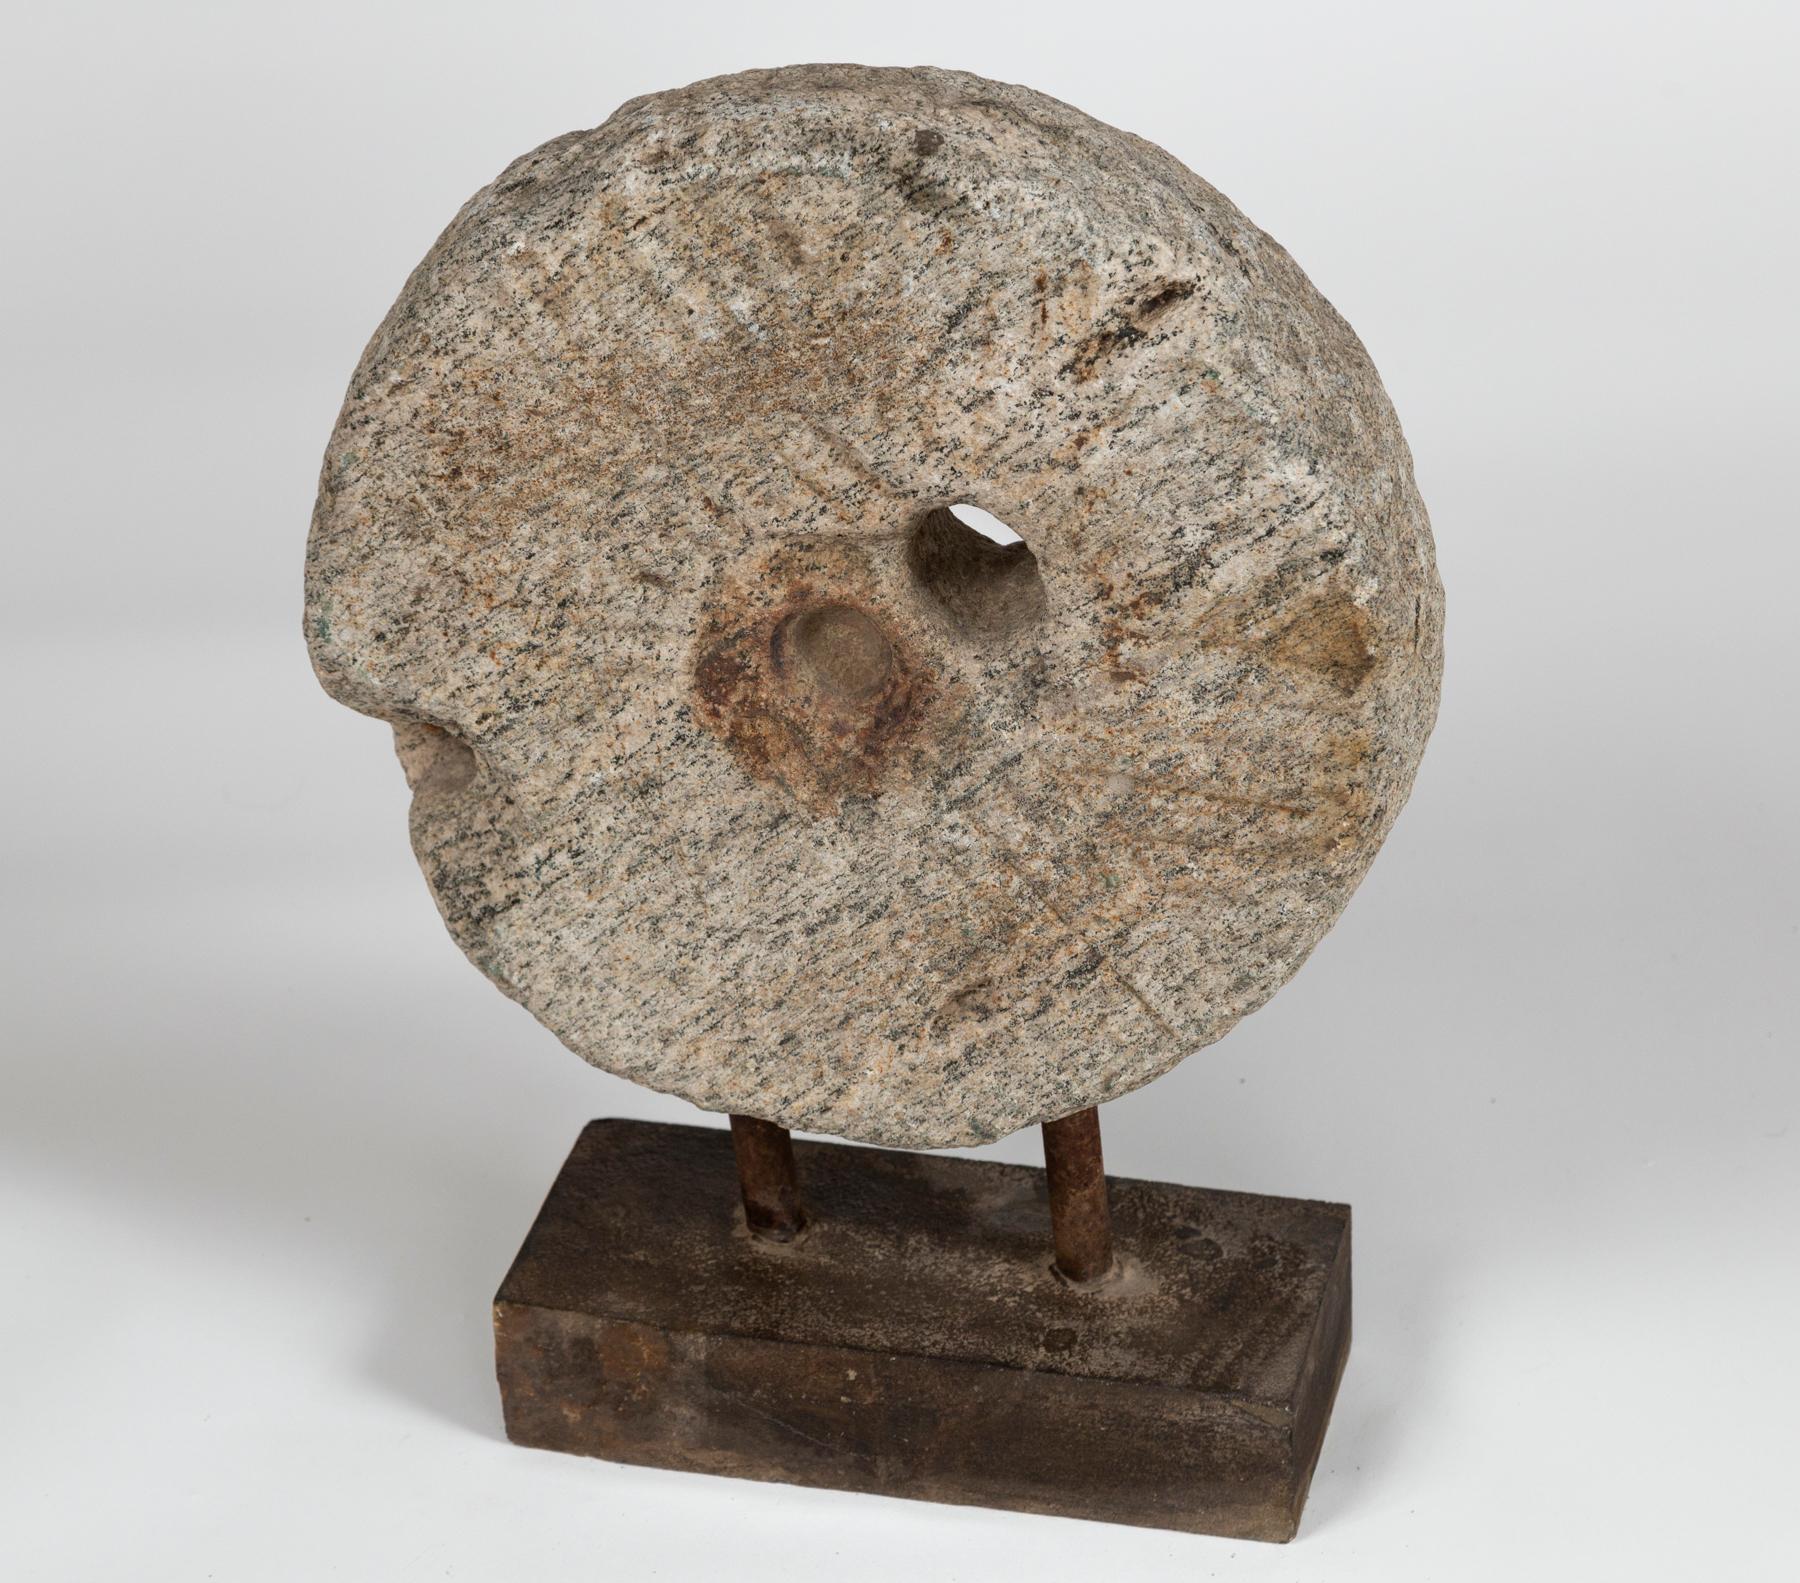 Vintage Millstone on Base, 20th Century. Hand-carved, granite millstone mounted on base creates an organic sculpture.